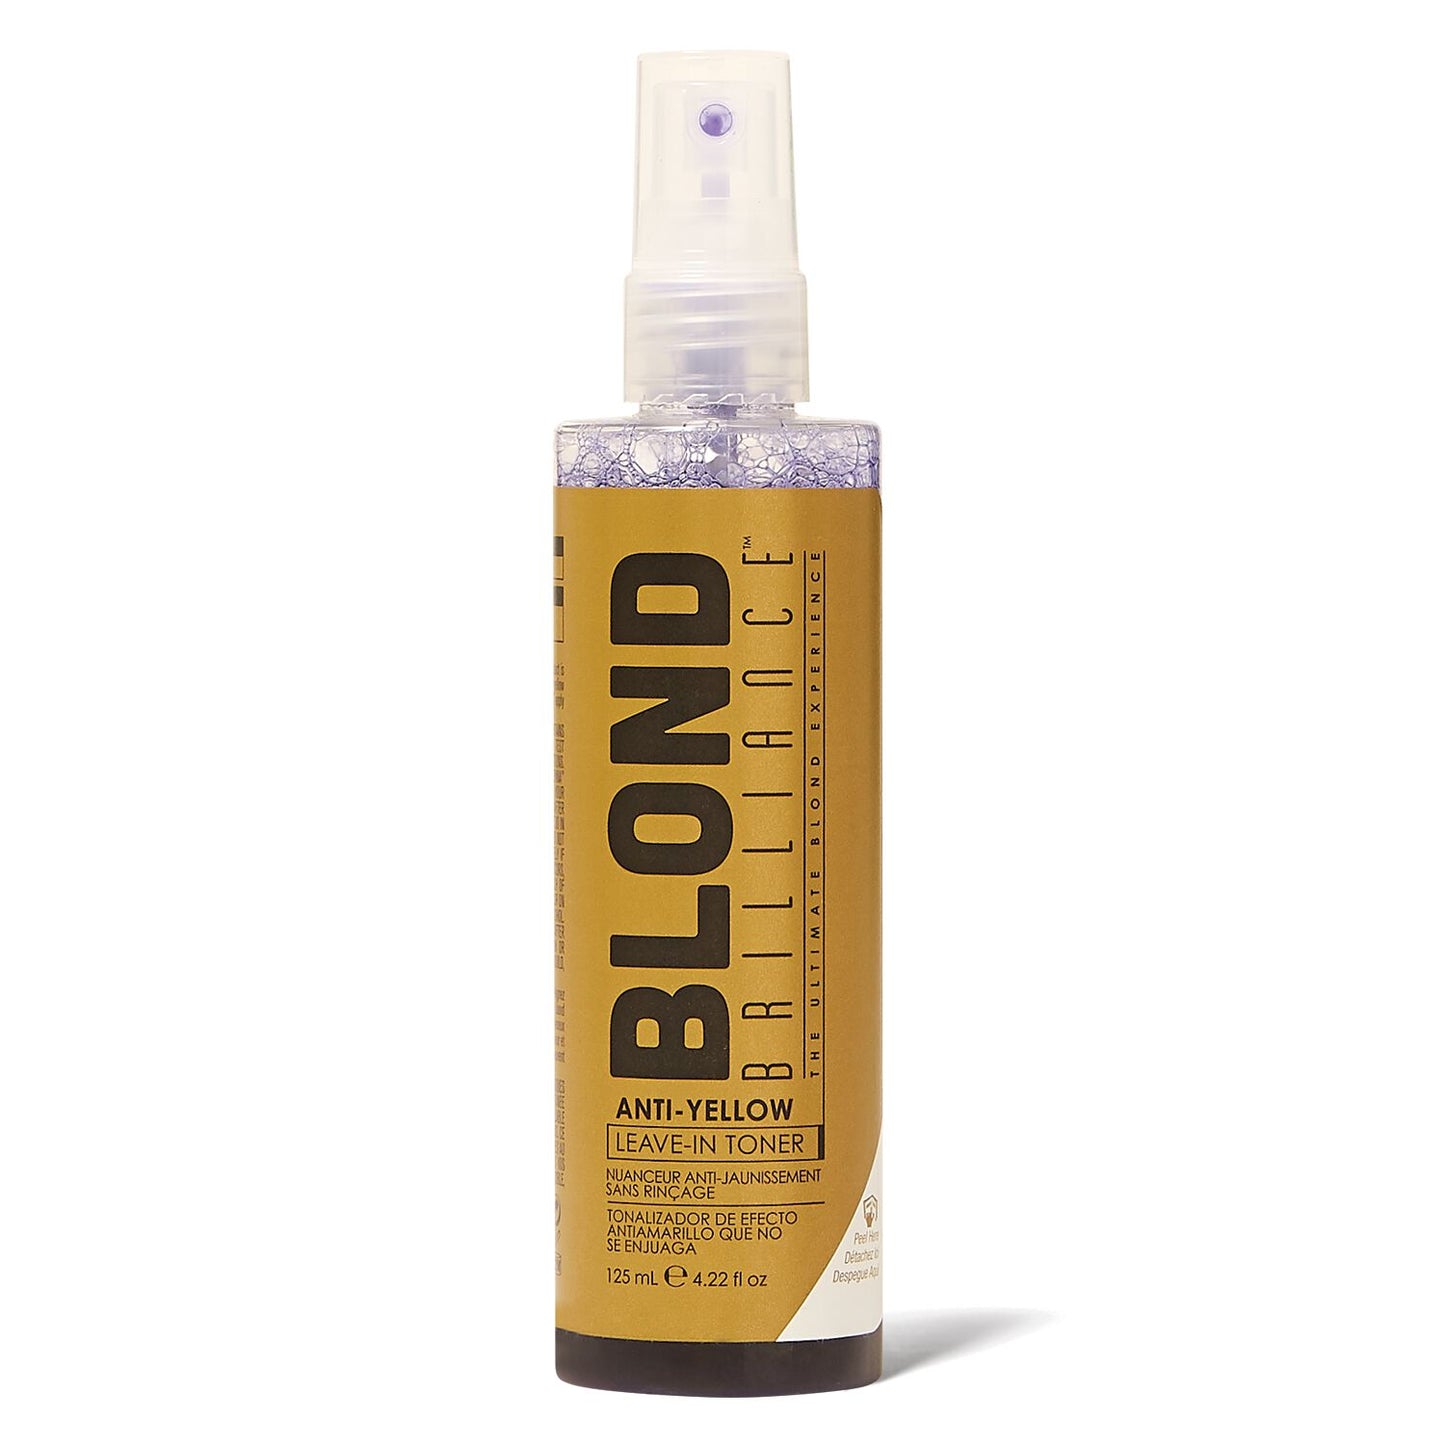 Blond Brilliance Anti-Yellow Leave-In Toner